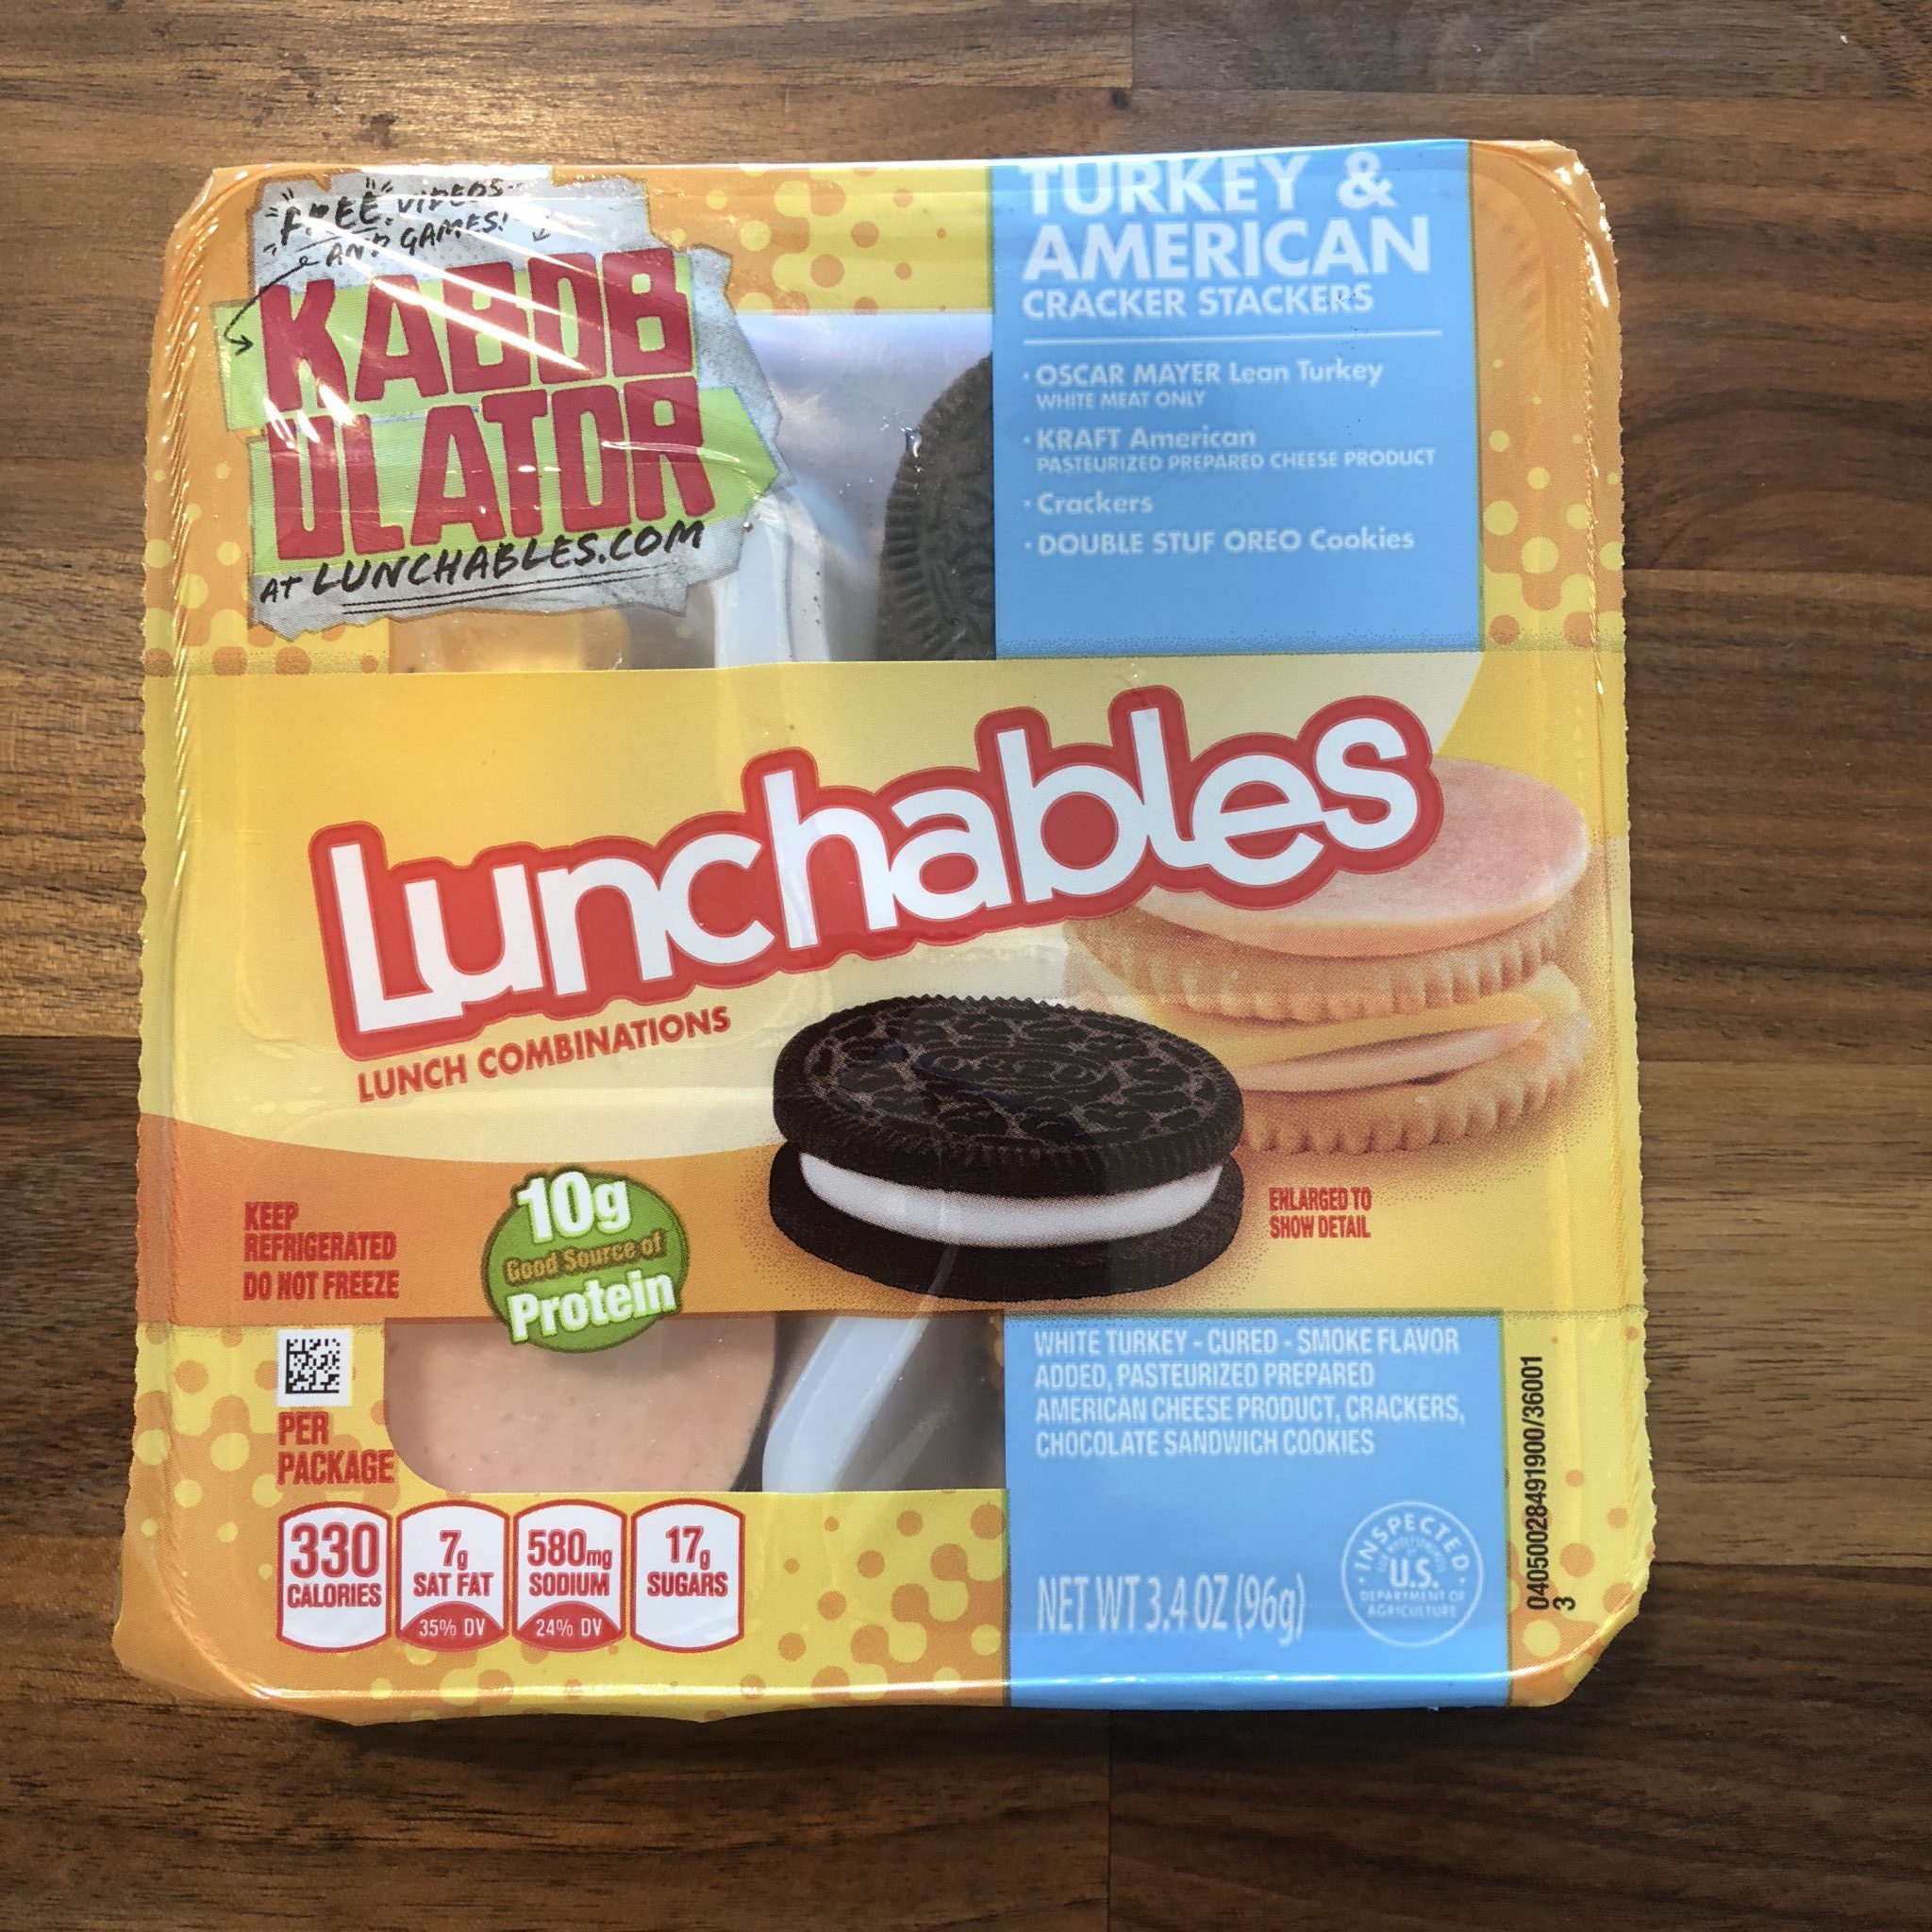 Taking on Lunchables... Shared Legacy Farms